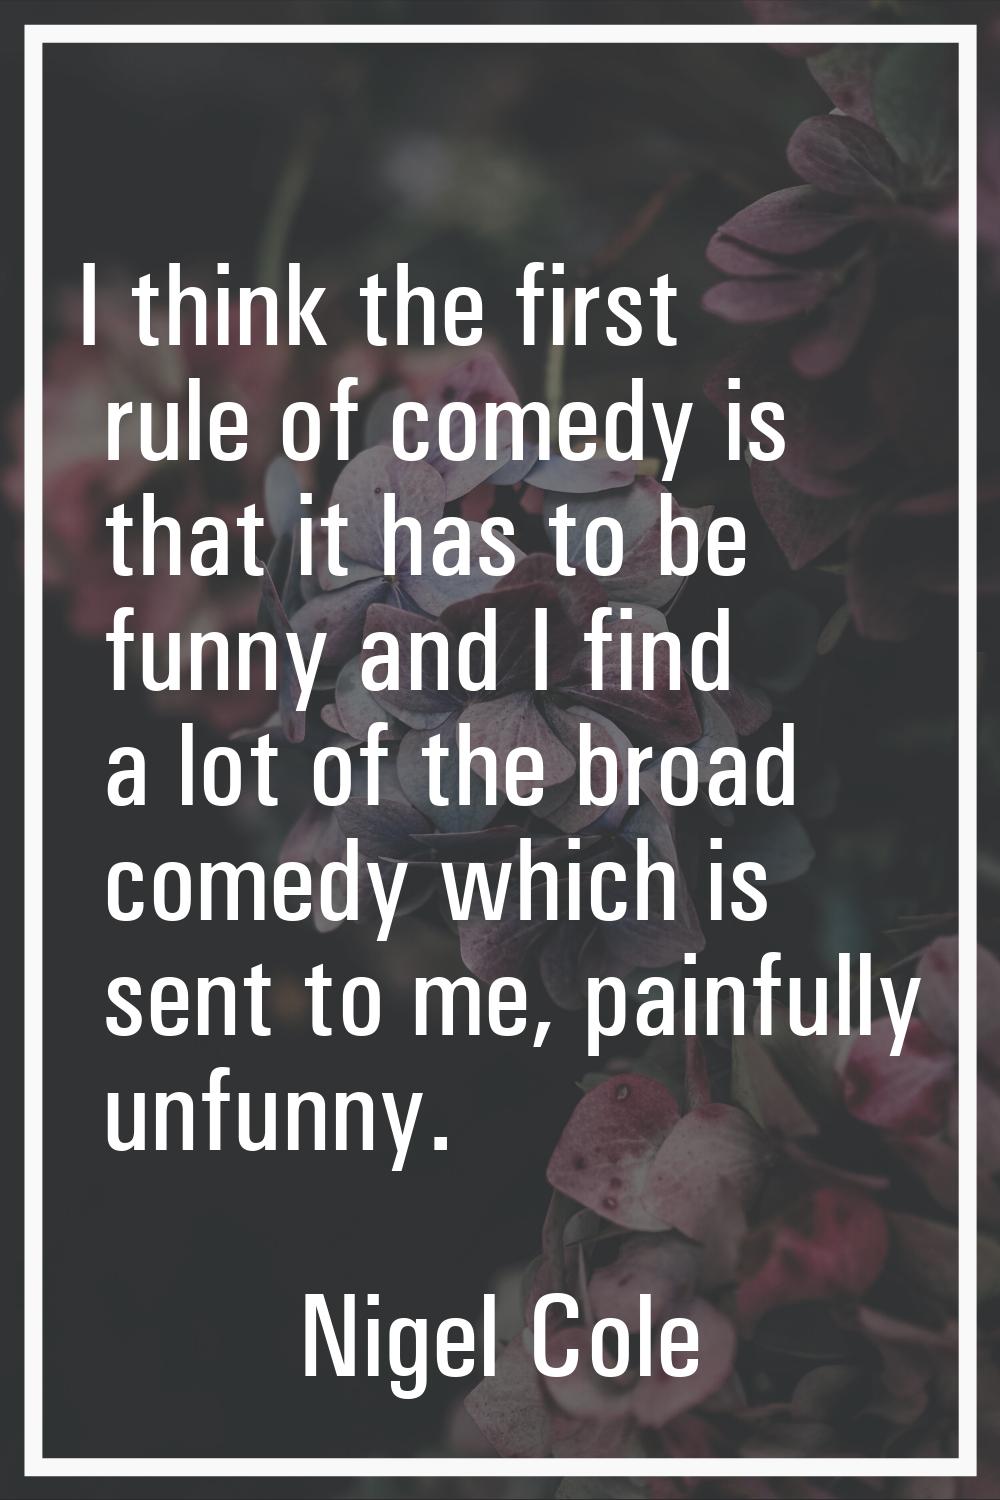 I think the first rule of comedy is that it has to be funny and I find a lot of the broad comedy wh